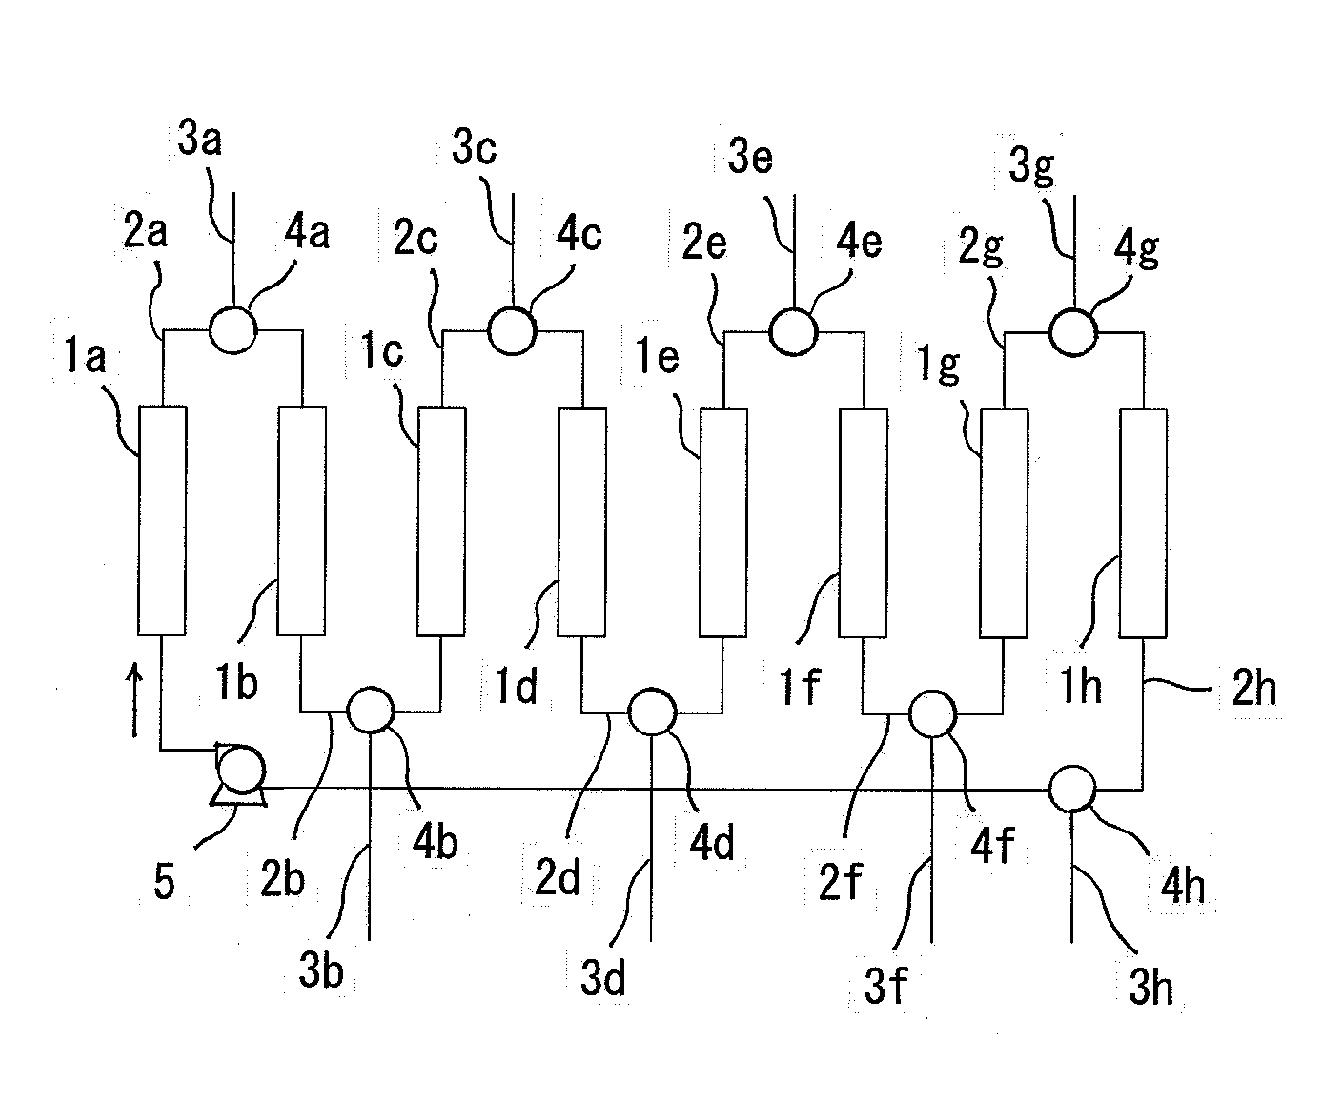 Method for producing a target substance using a simulated moving bed chromatography separation system